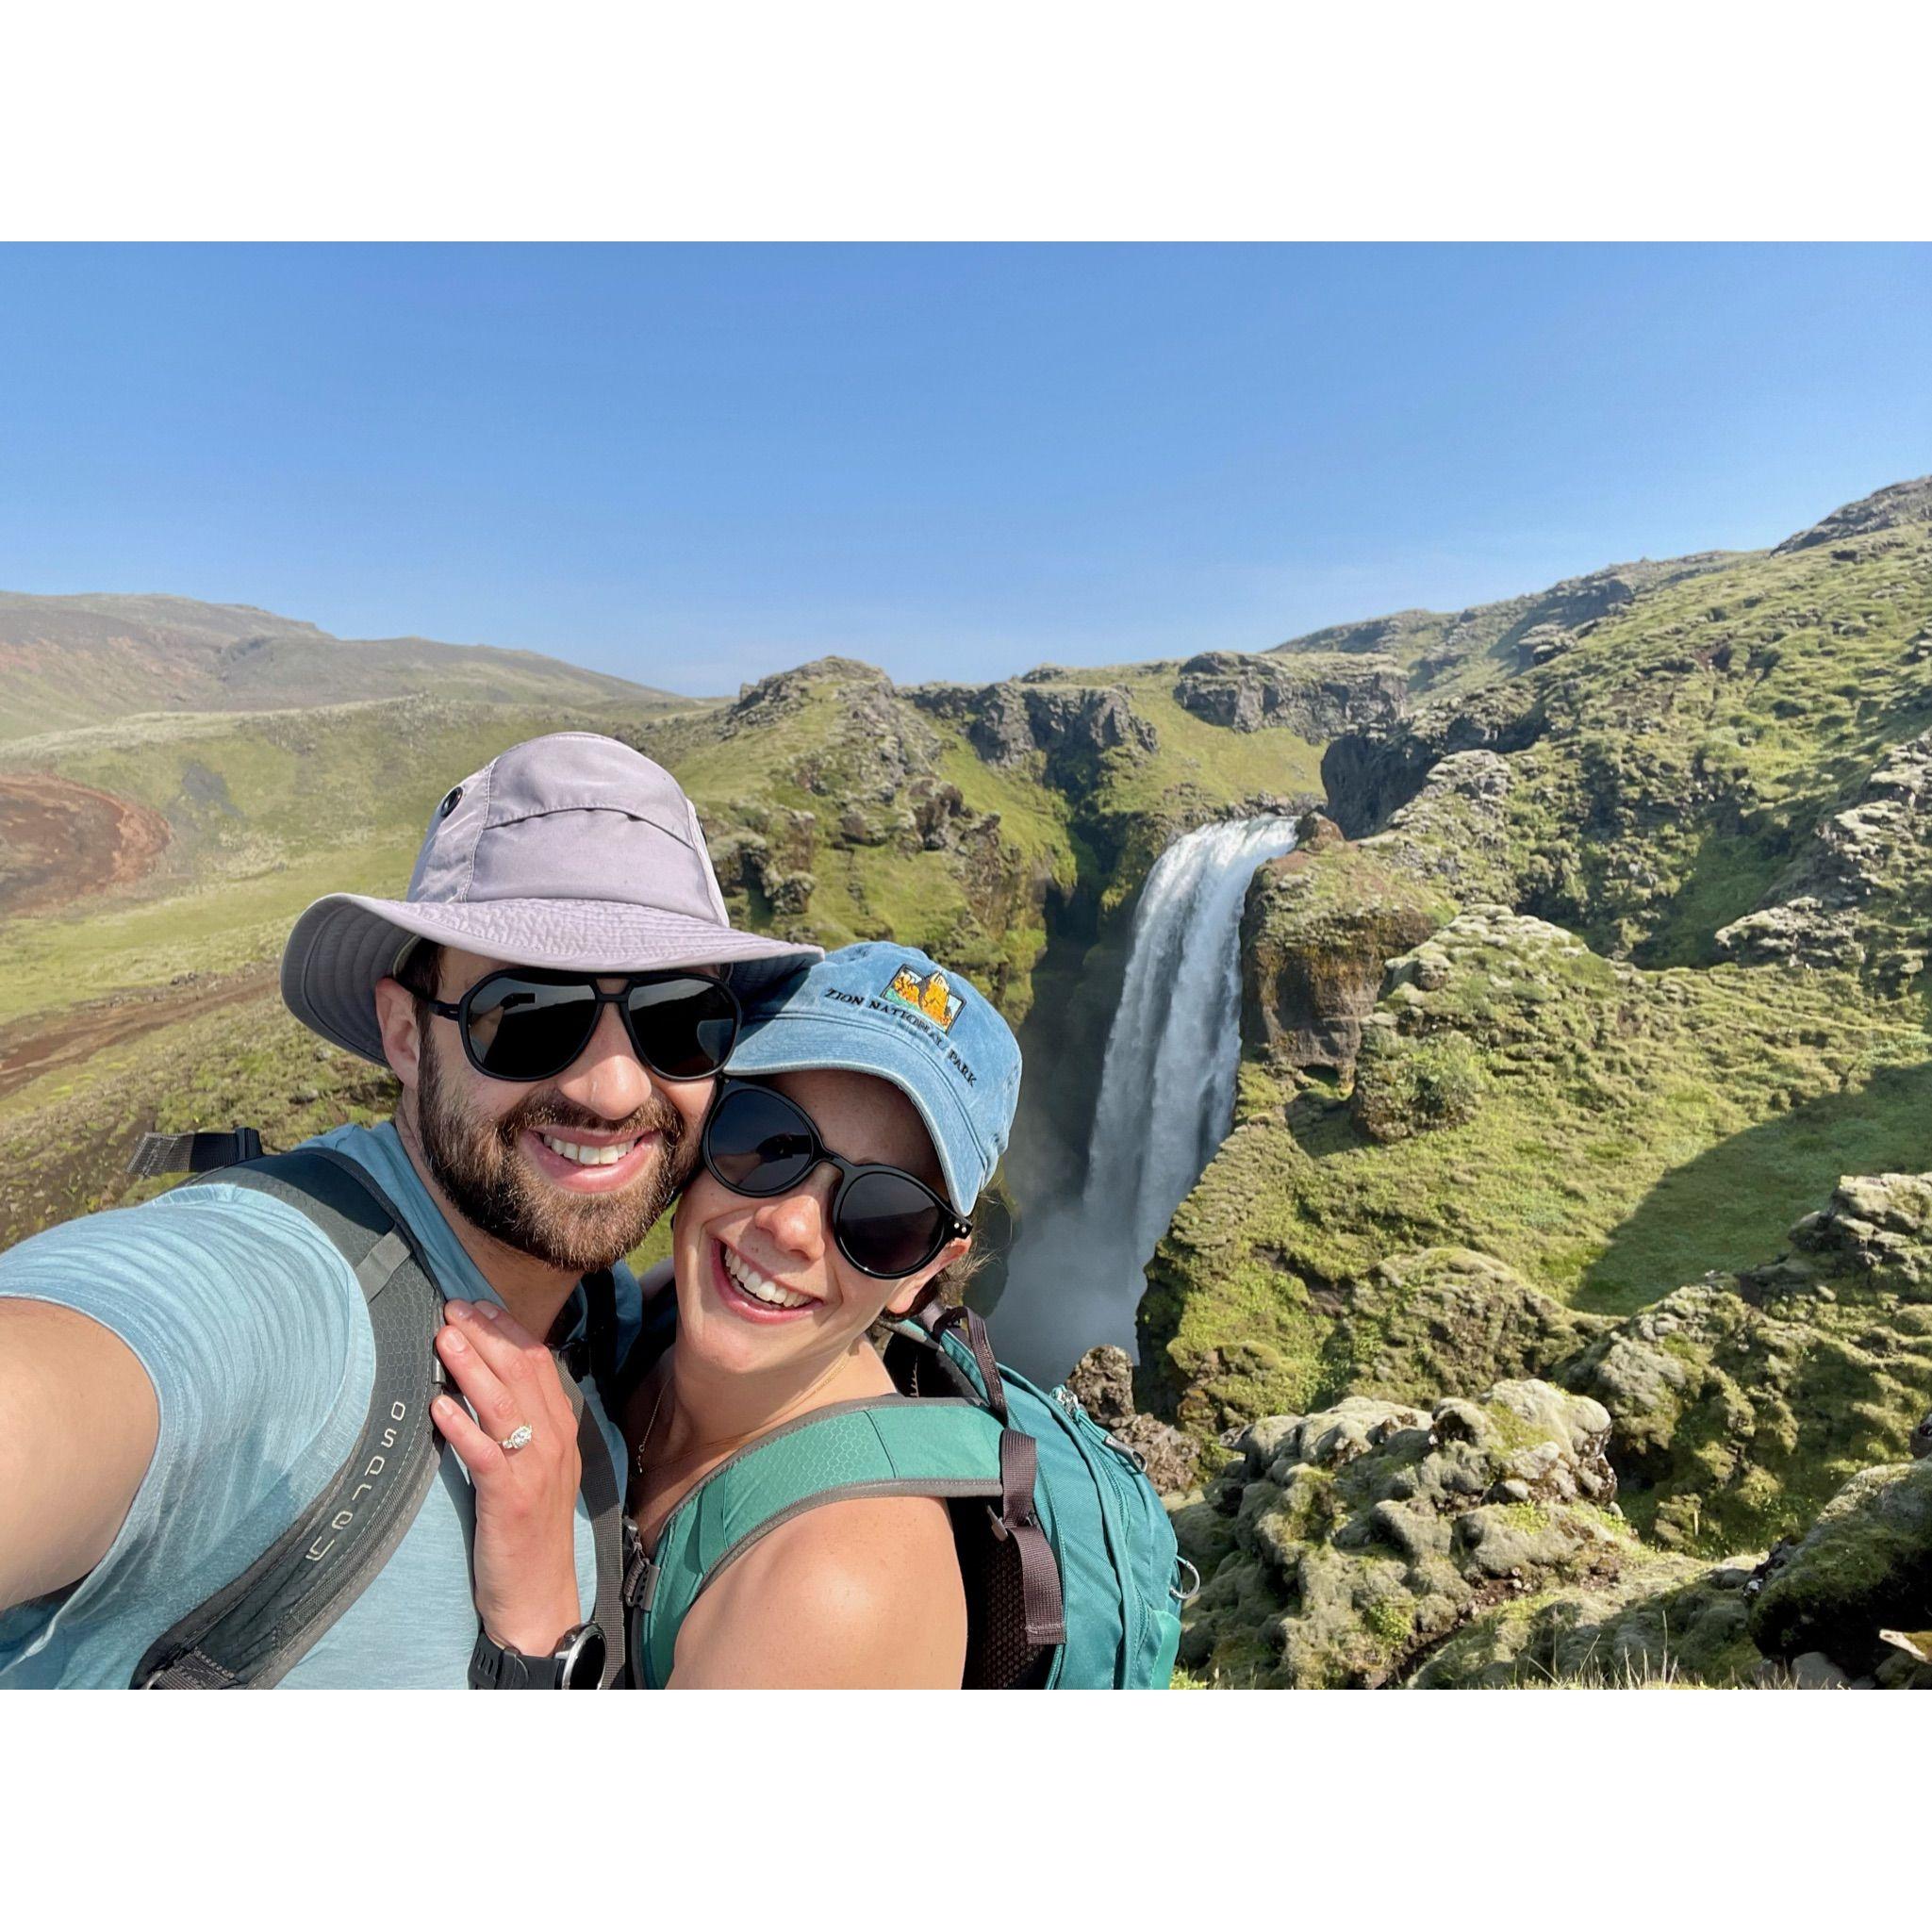 Arguably our second favorite hike that we've done together.  The 16mi trek took us through green falls, glaciers, volcanic rock, primary, and secondary growth! Fimmvorduhals, Iceland, August 2021